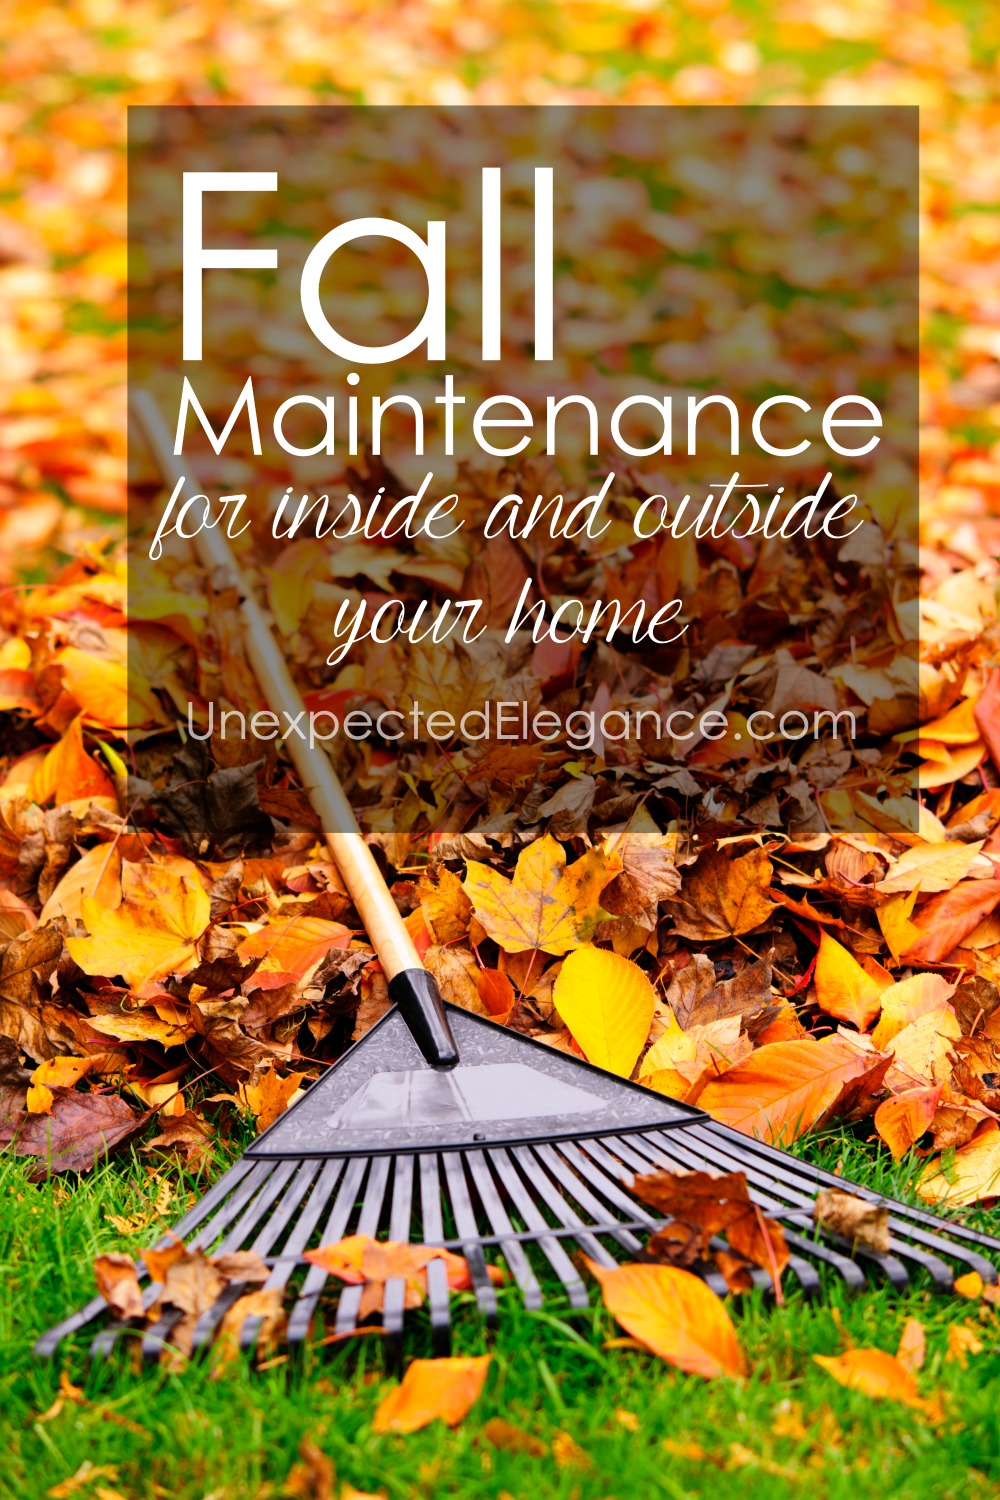 Fall is the perfect time to start maintaining for your home. There are several fall maintenance tips for inside and outside the home, whether it's your lawn or your heating system.